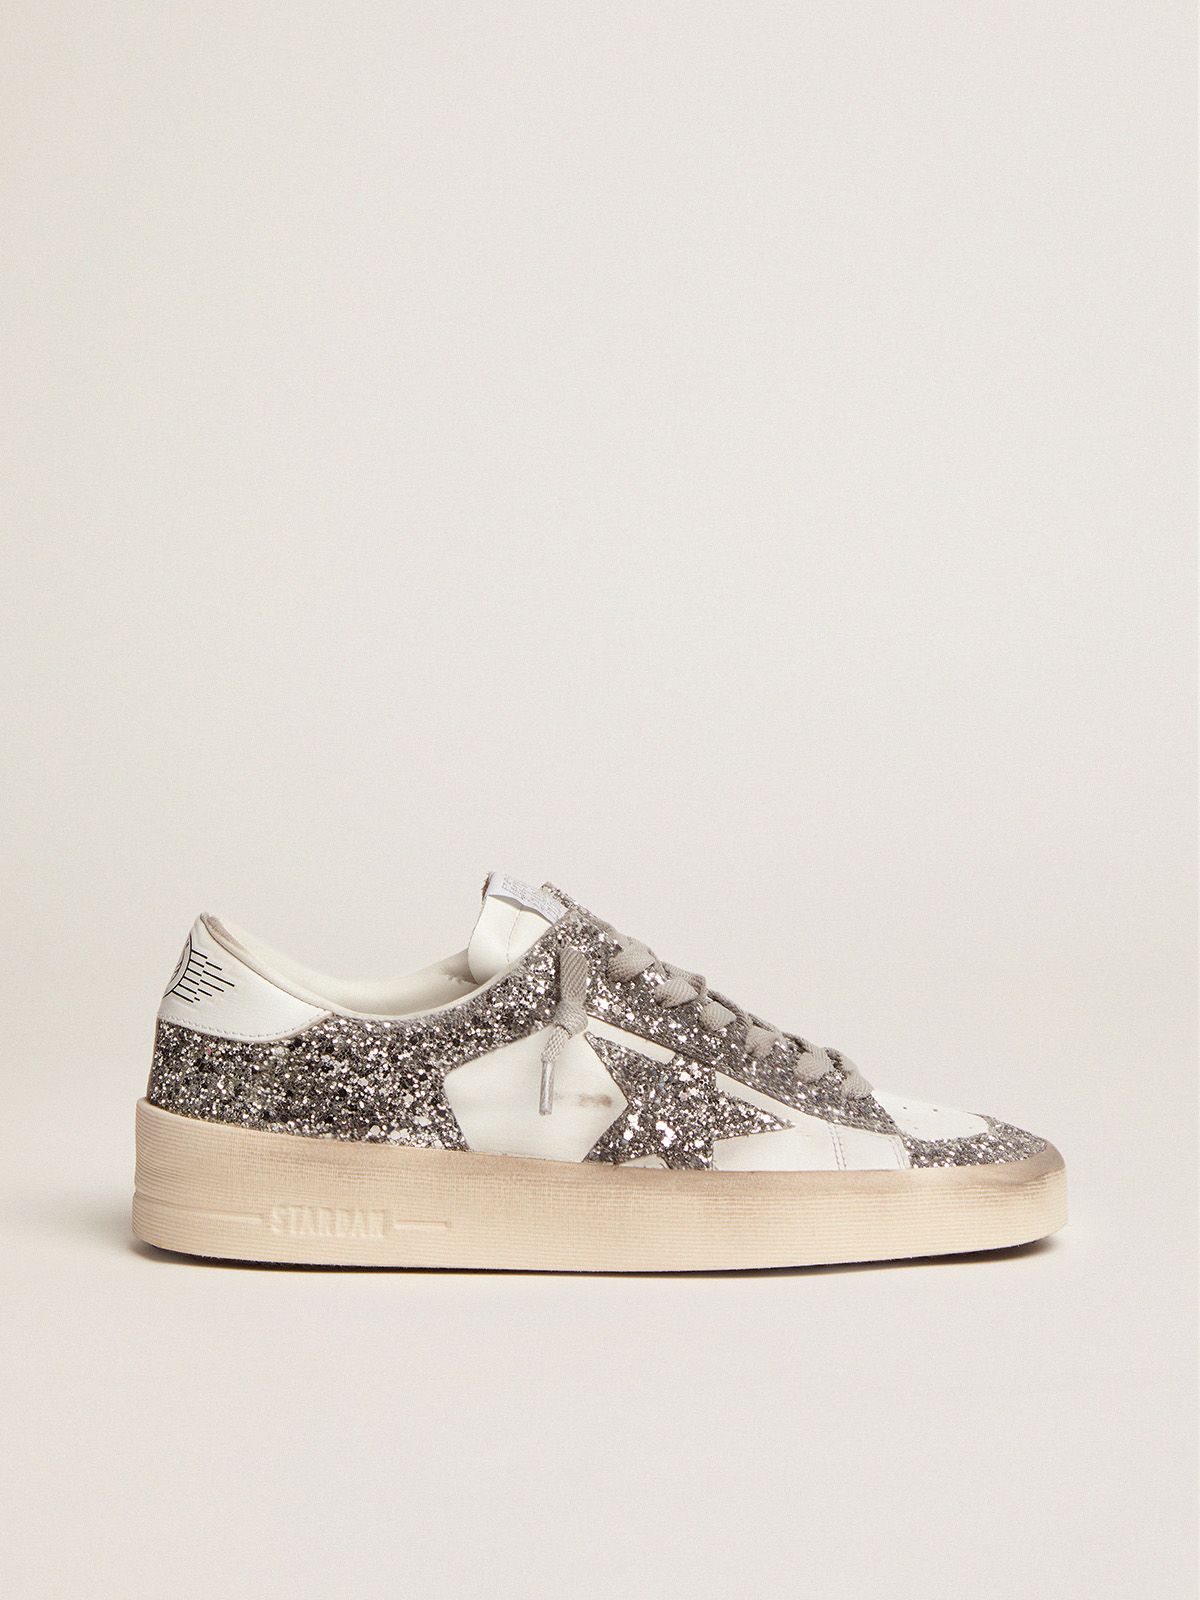 golden goose white in glitter leather Stardan sneakers and silver